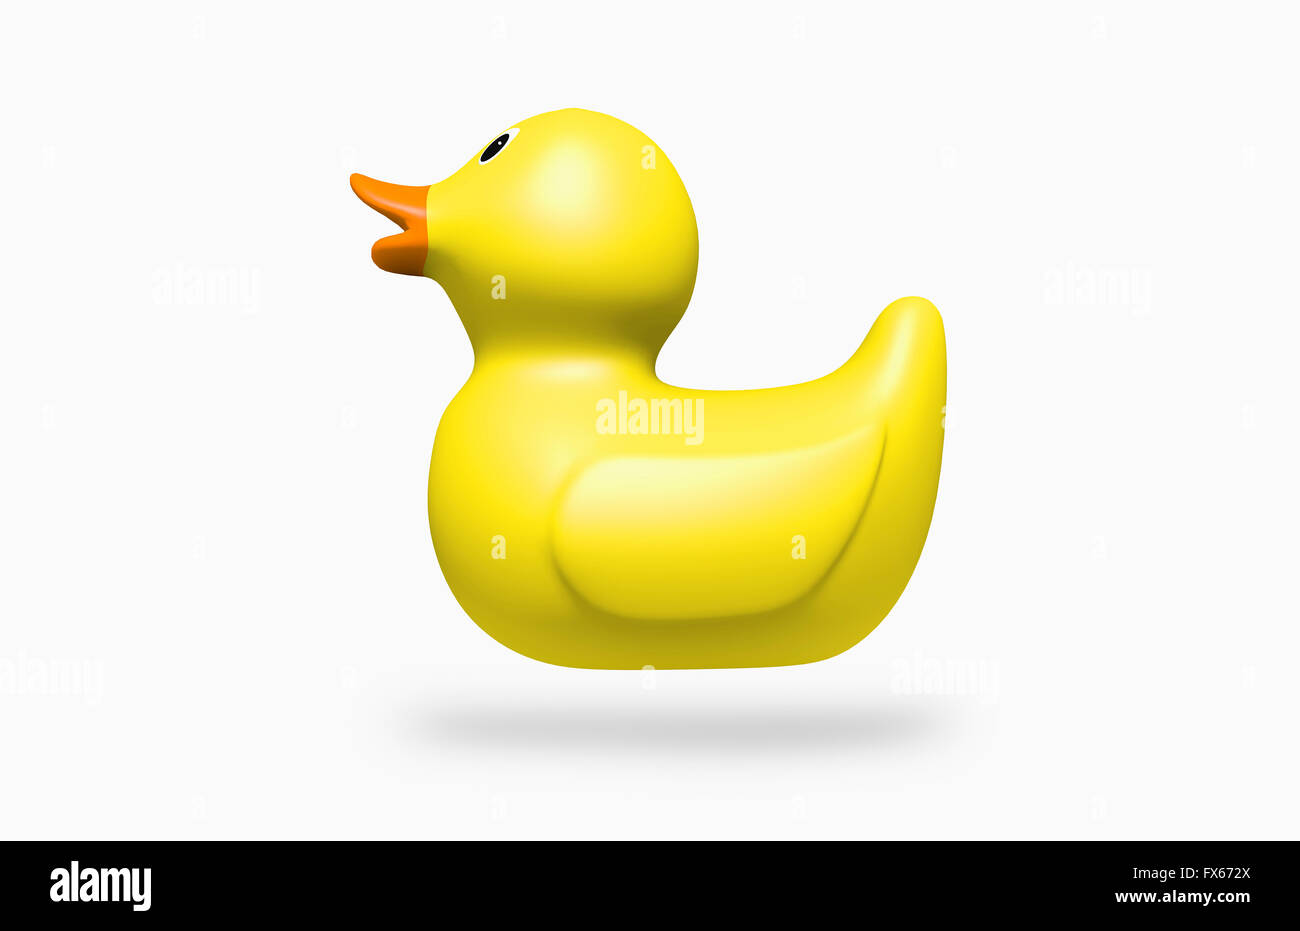 Floating rubber duck Stock Photo